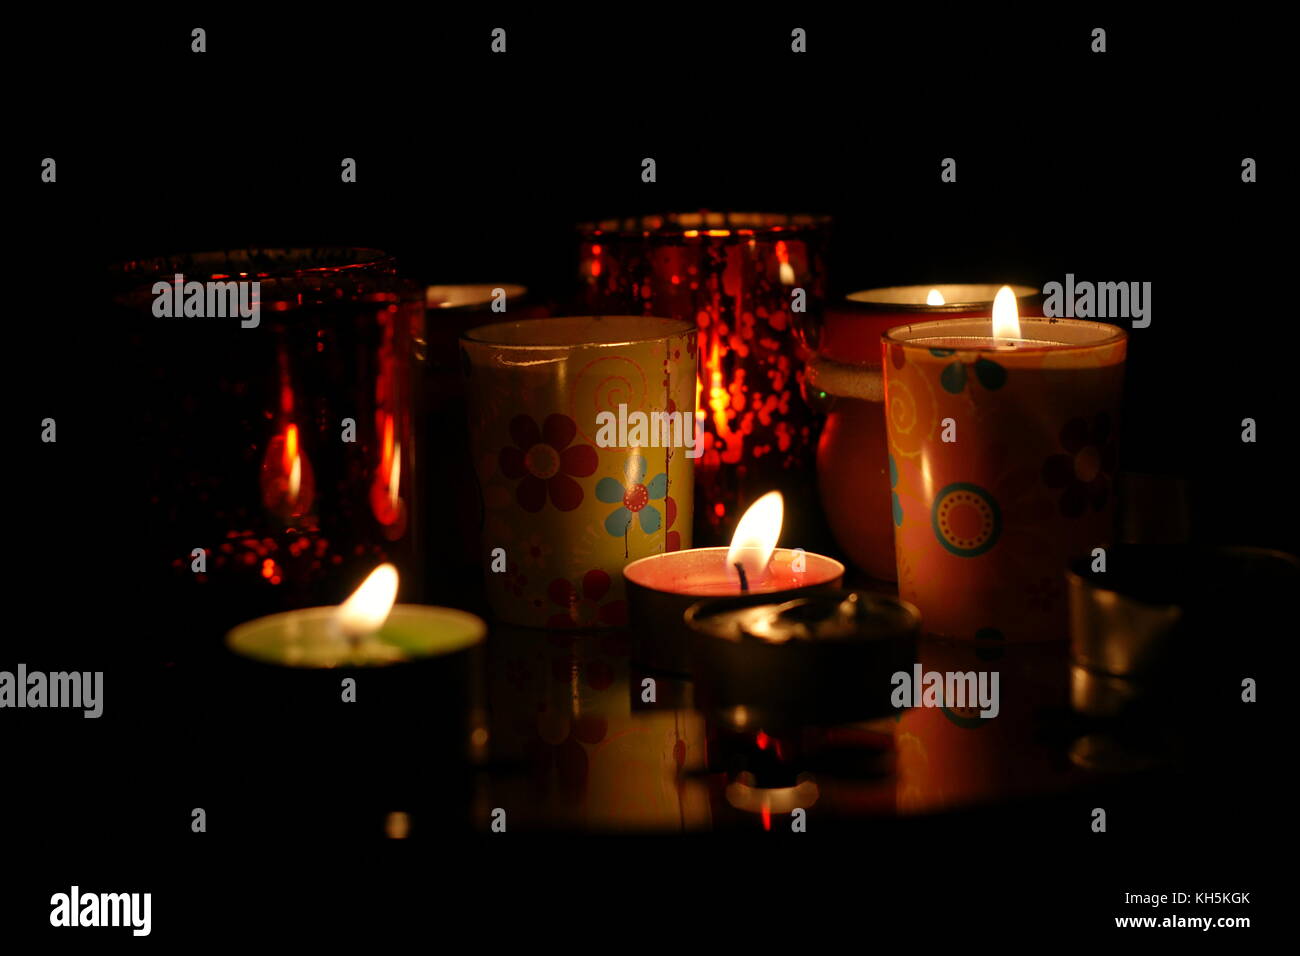 Lit candles with flames flickering in the darkness at nighttime Stock Photo